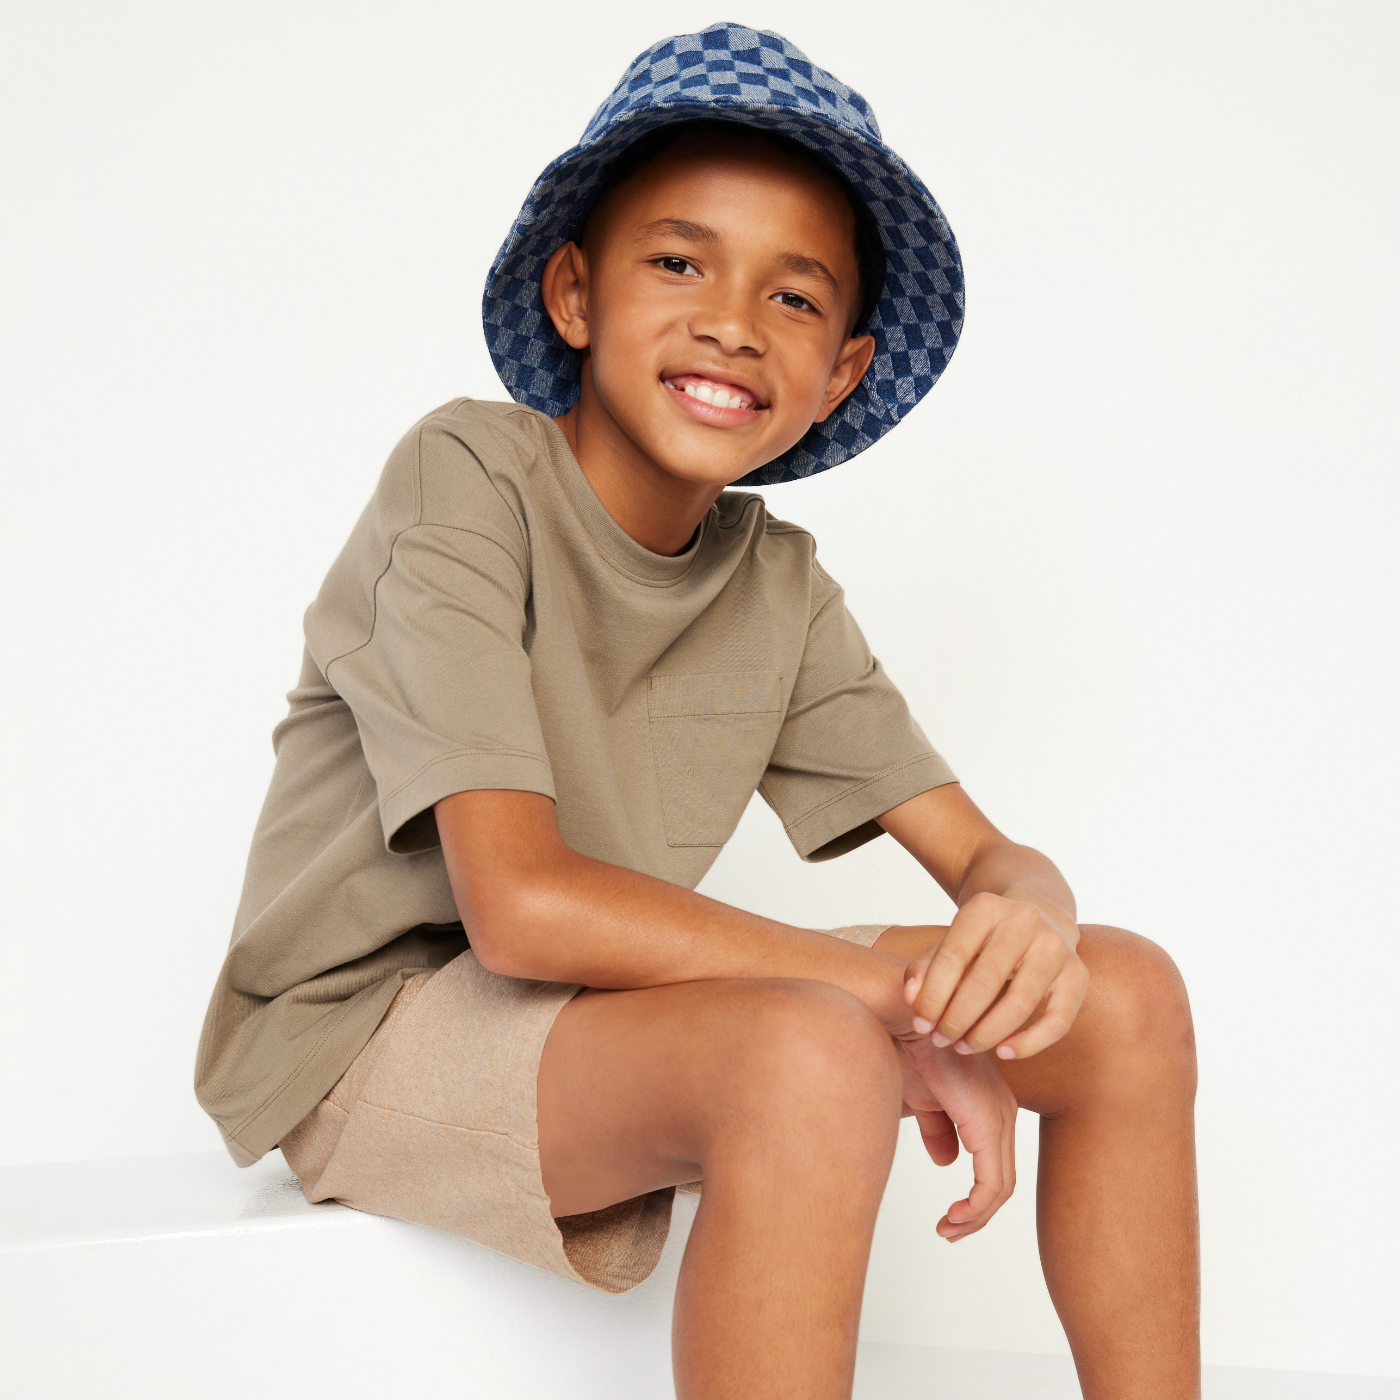 Young boy model wearing tan t-shirt and tan shorts with checkered bucket hat.